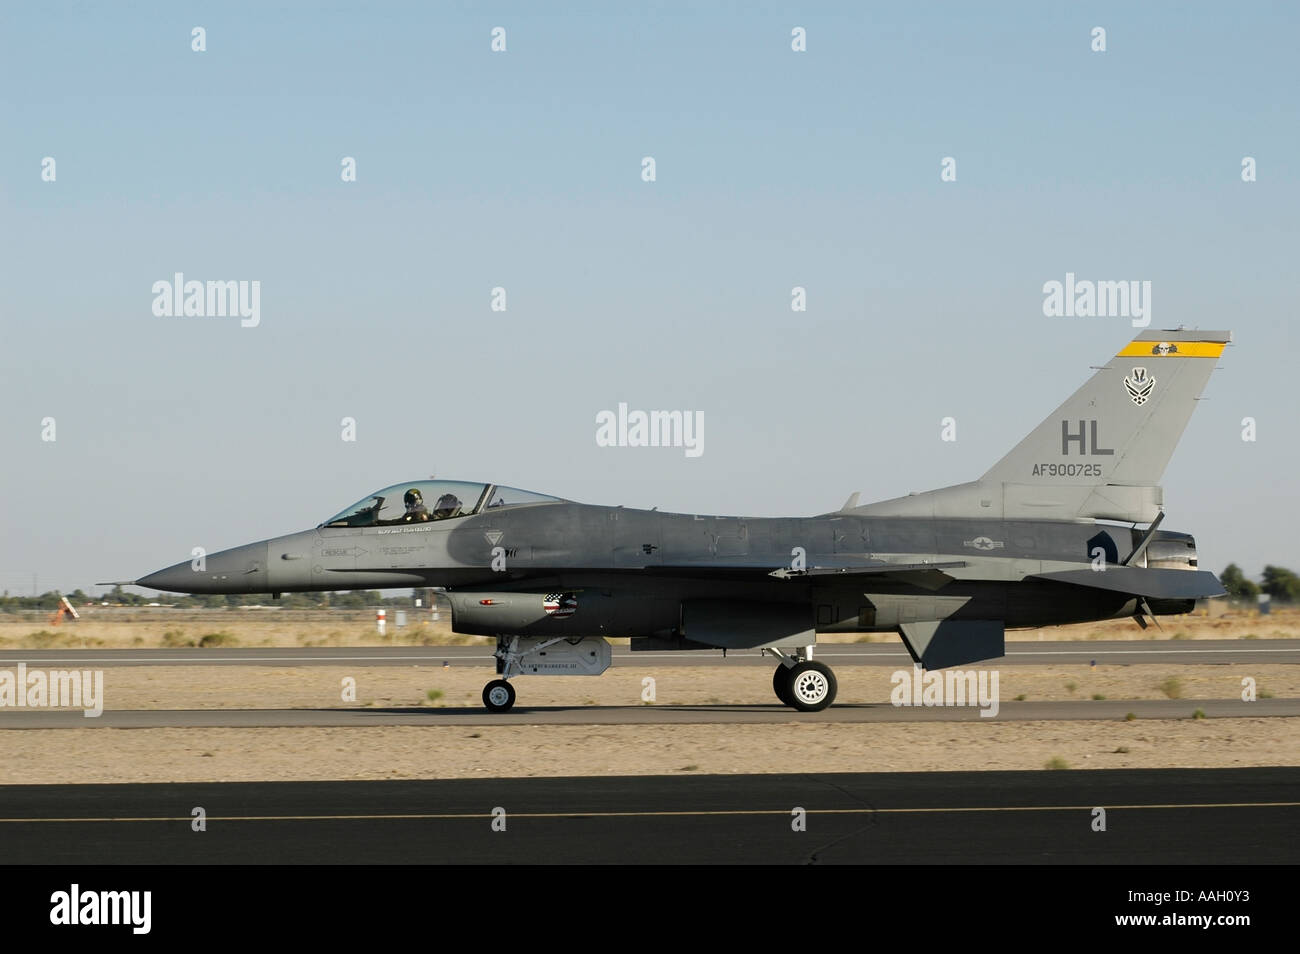 Side View of F-16 Falcon Jet Fighter Taxiing on Runway Stock Photo